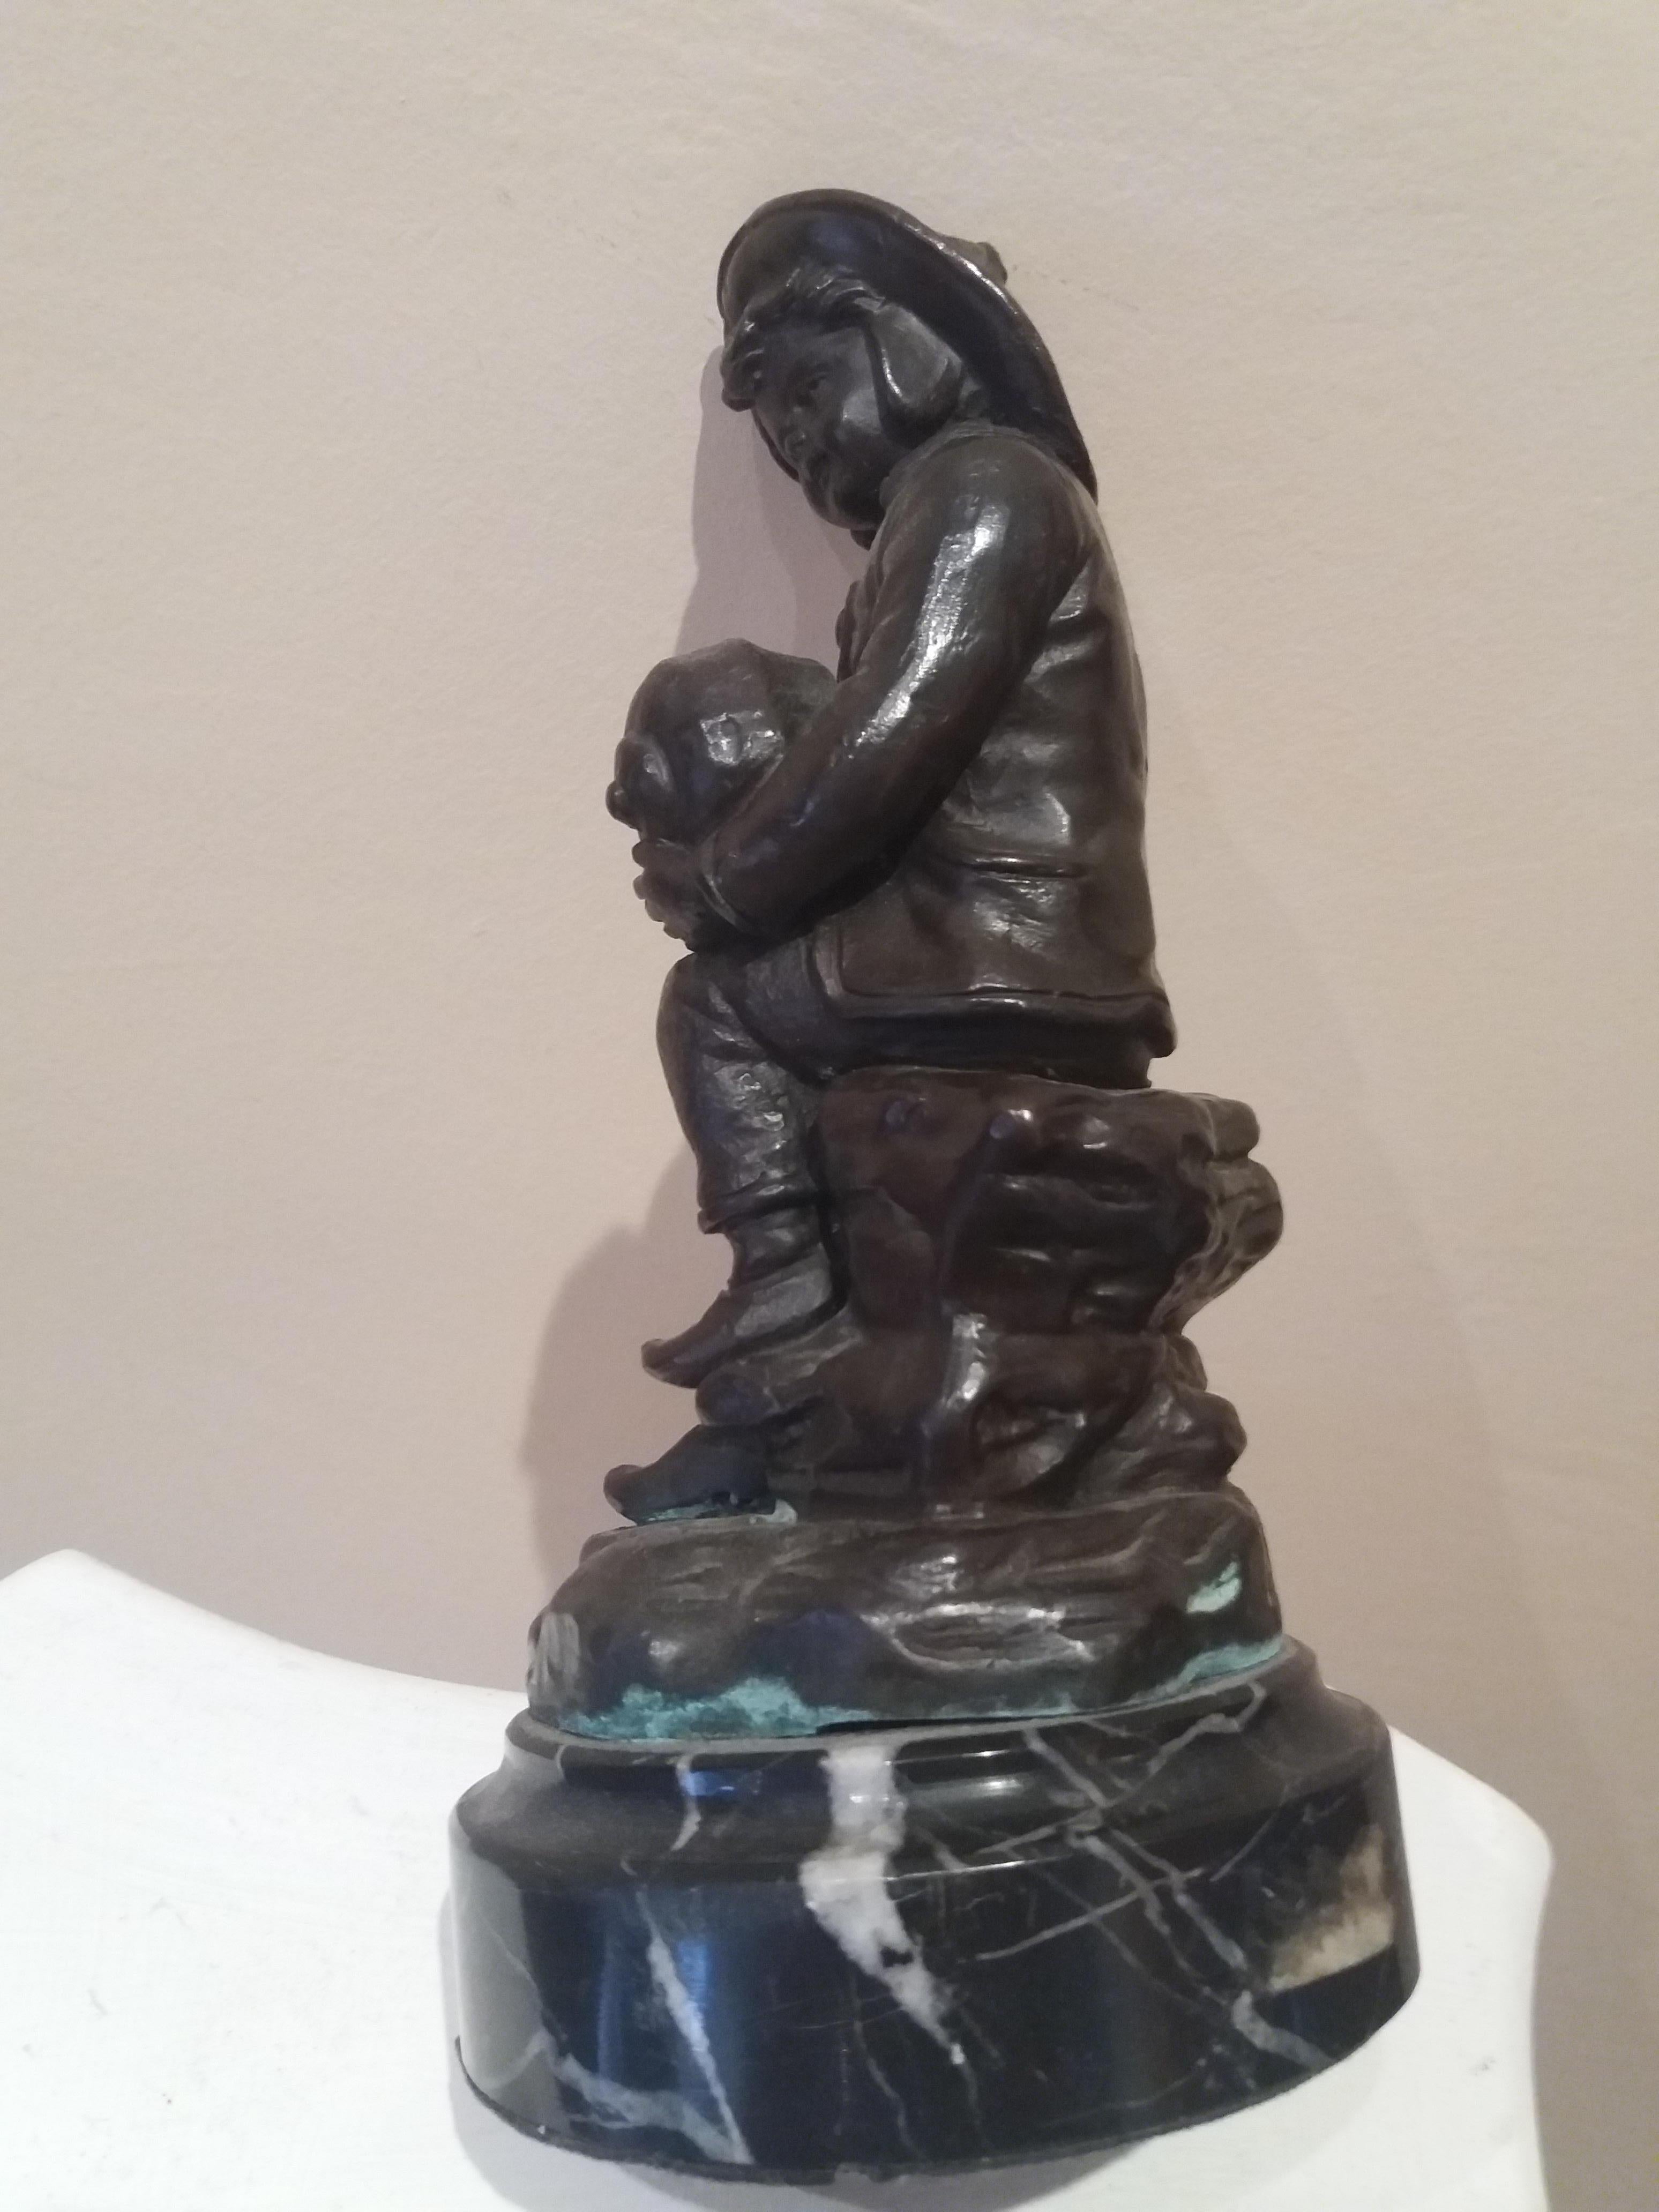 BOLLEL. Child and conch shell. Original multiple bronze sculpture